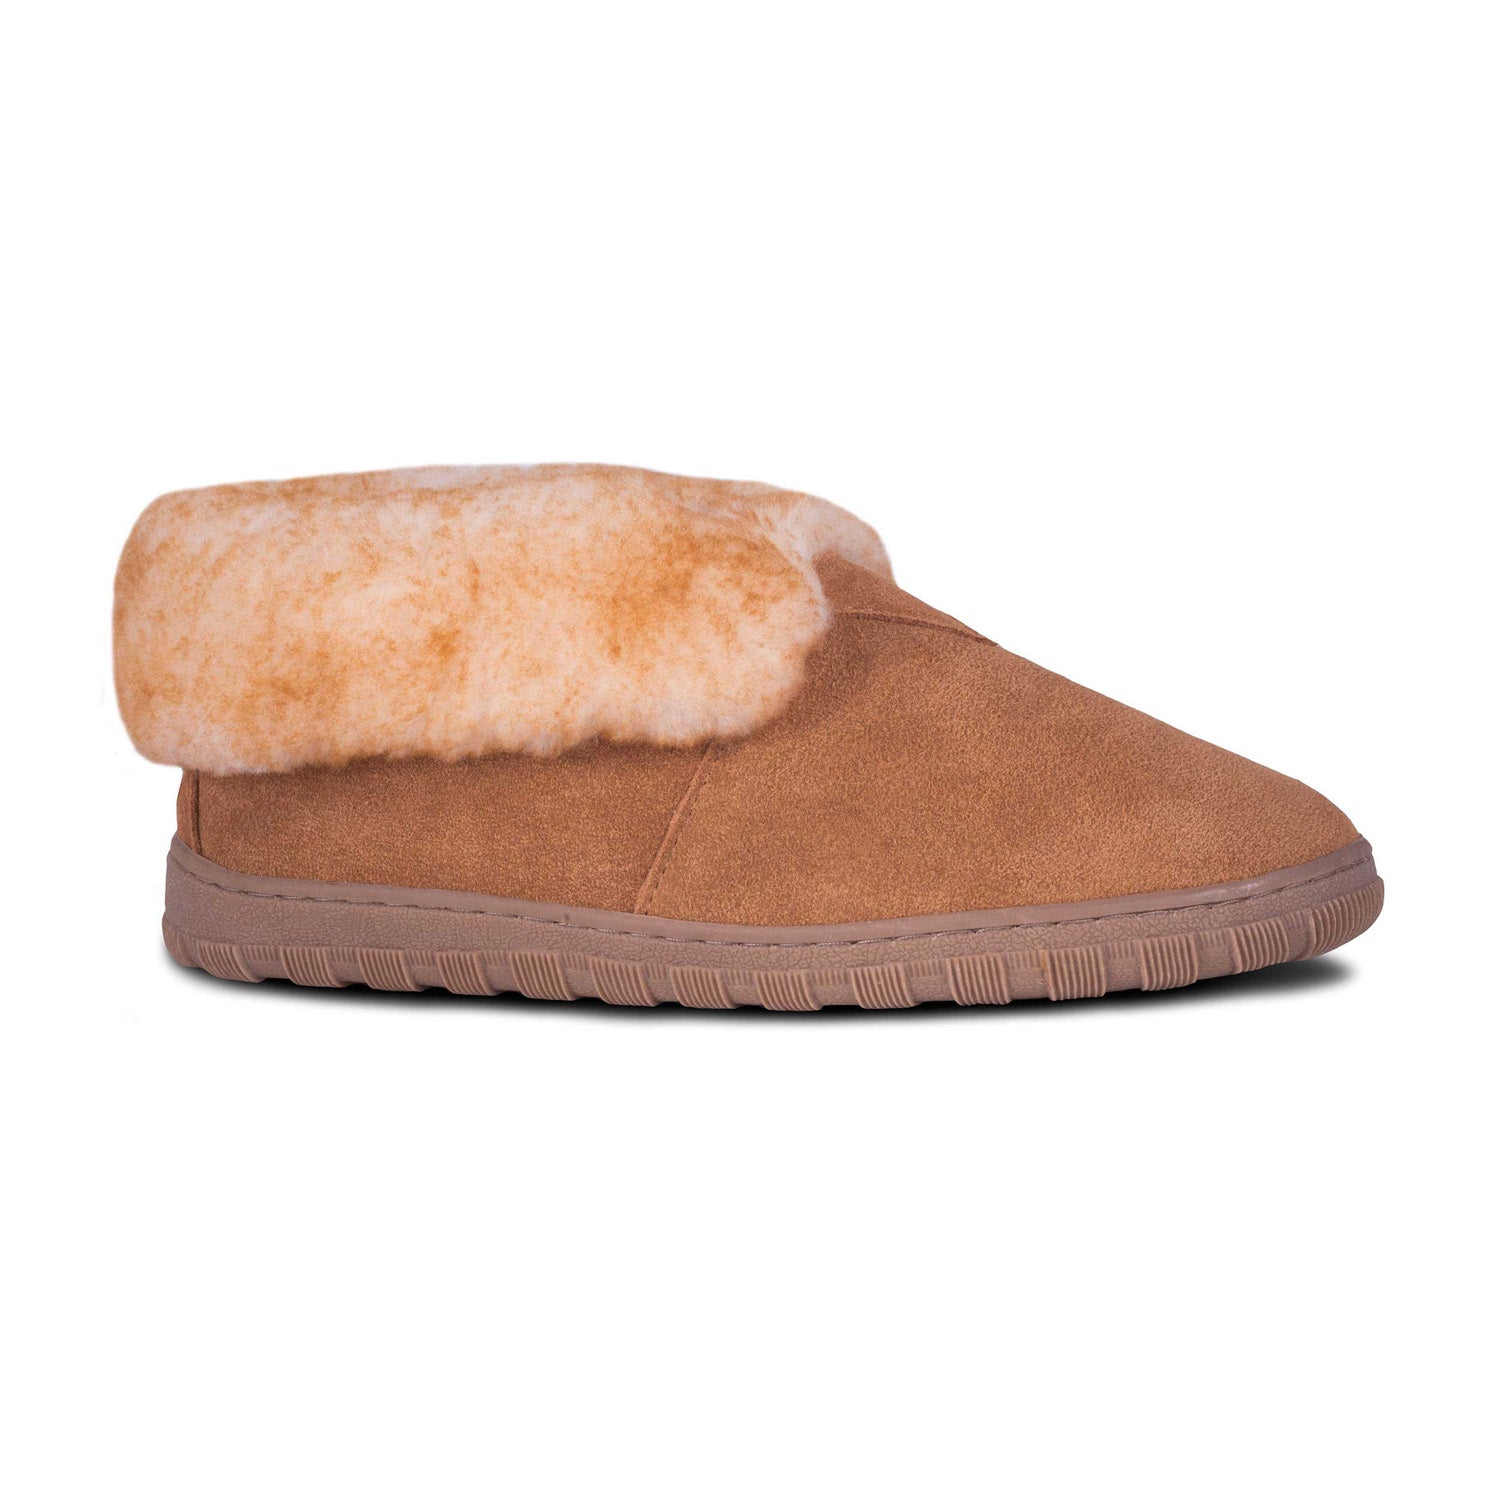 Womens Luxurious Suede and Double Faced Sheepskin Three 